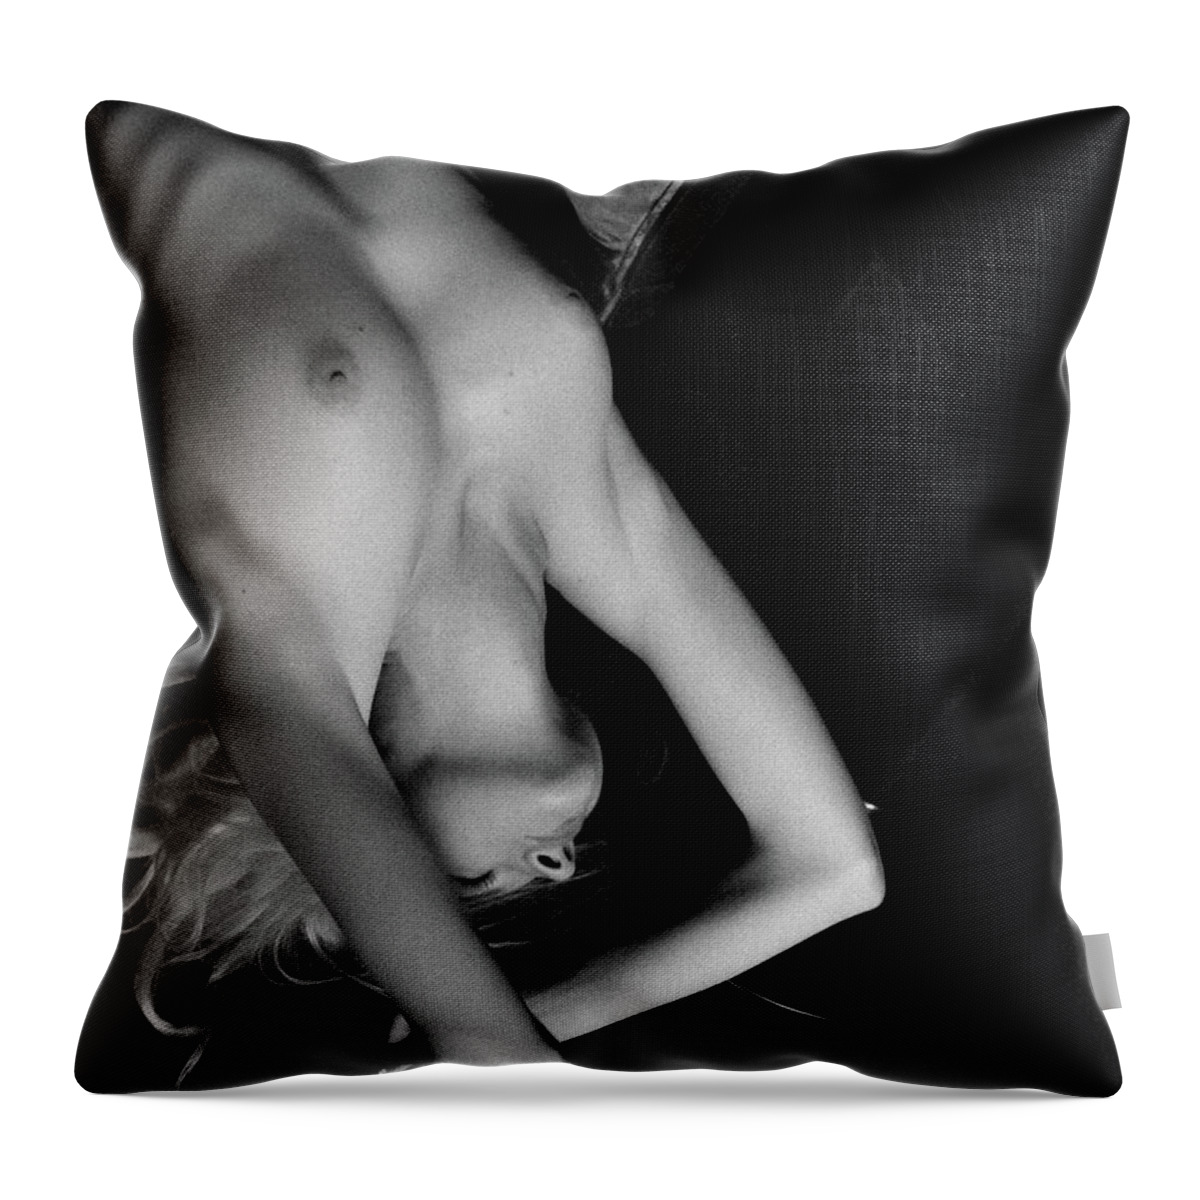 Blue Muse Fine Art Throw Pillow featuring the photograph Slowly by Blue Muse Fine Art